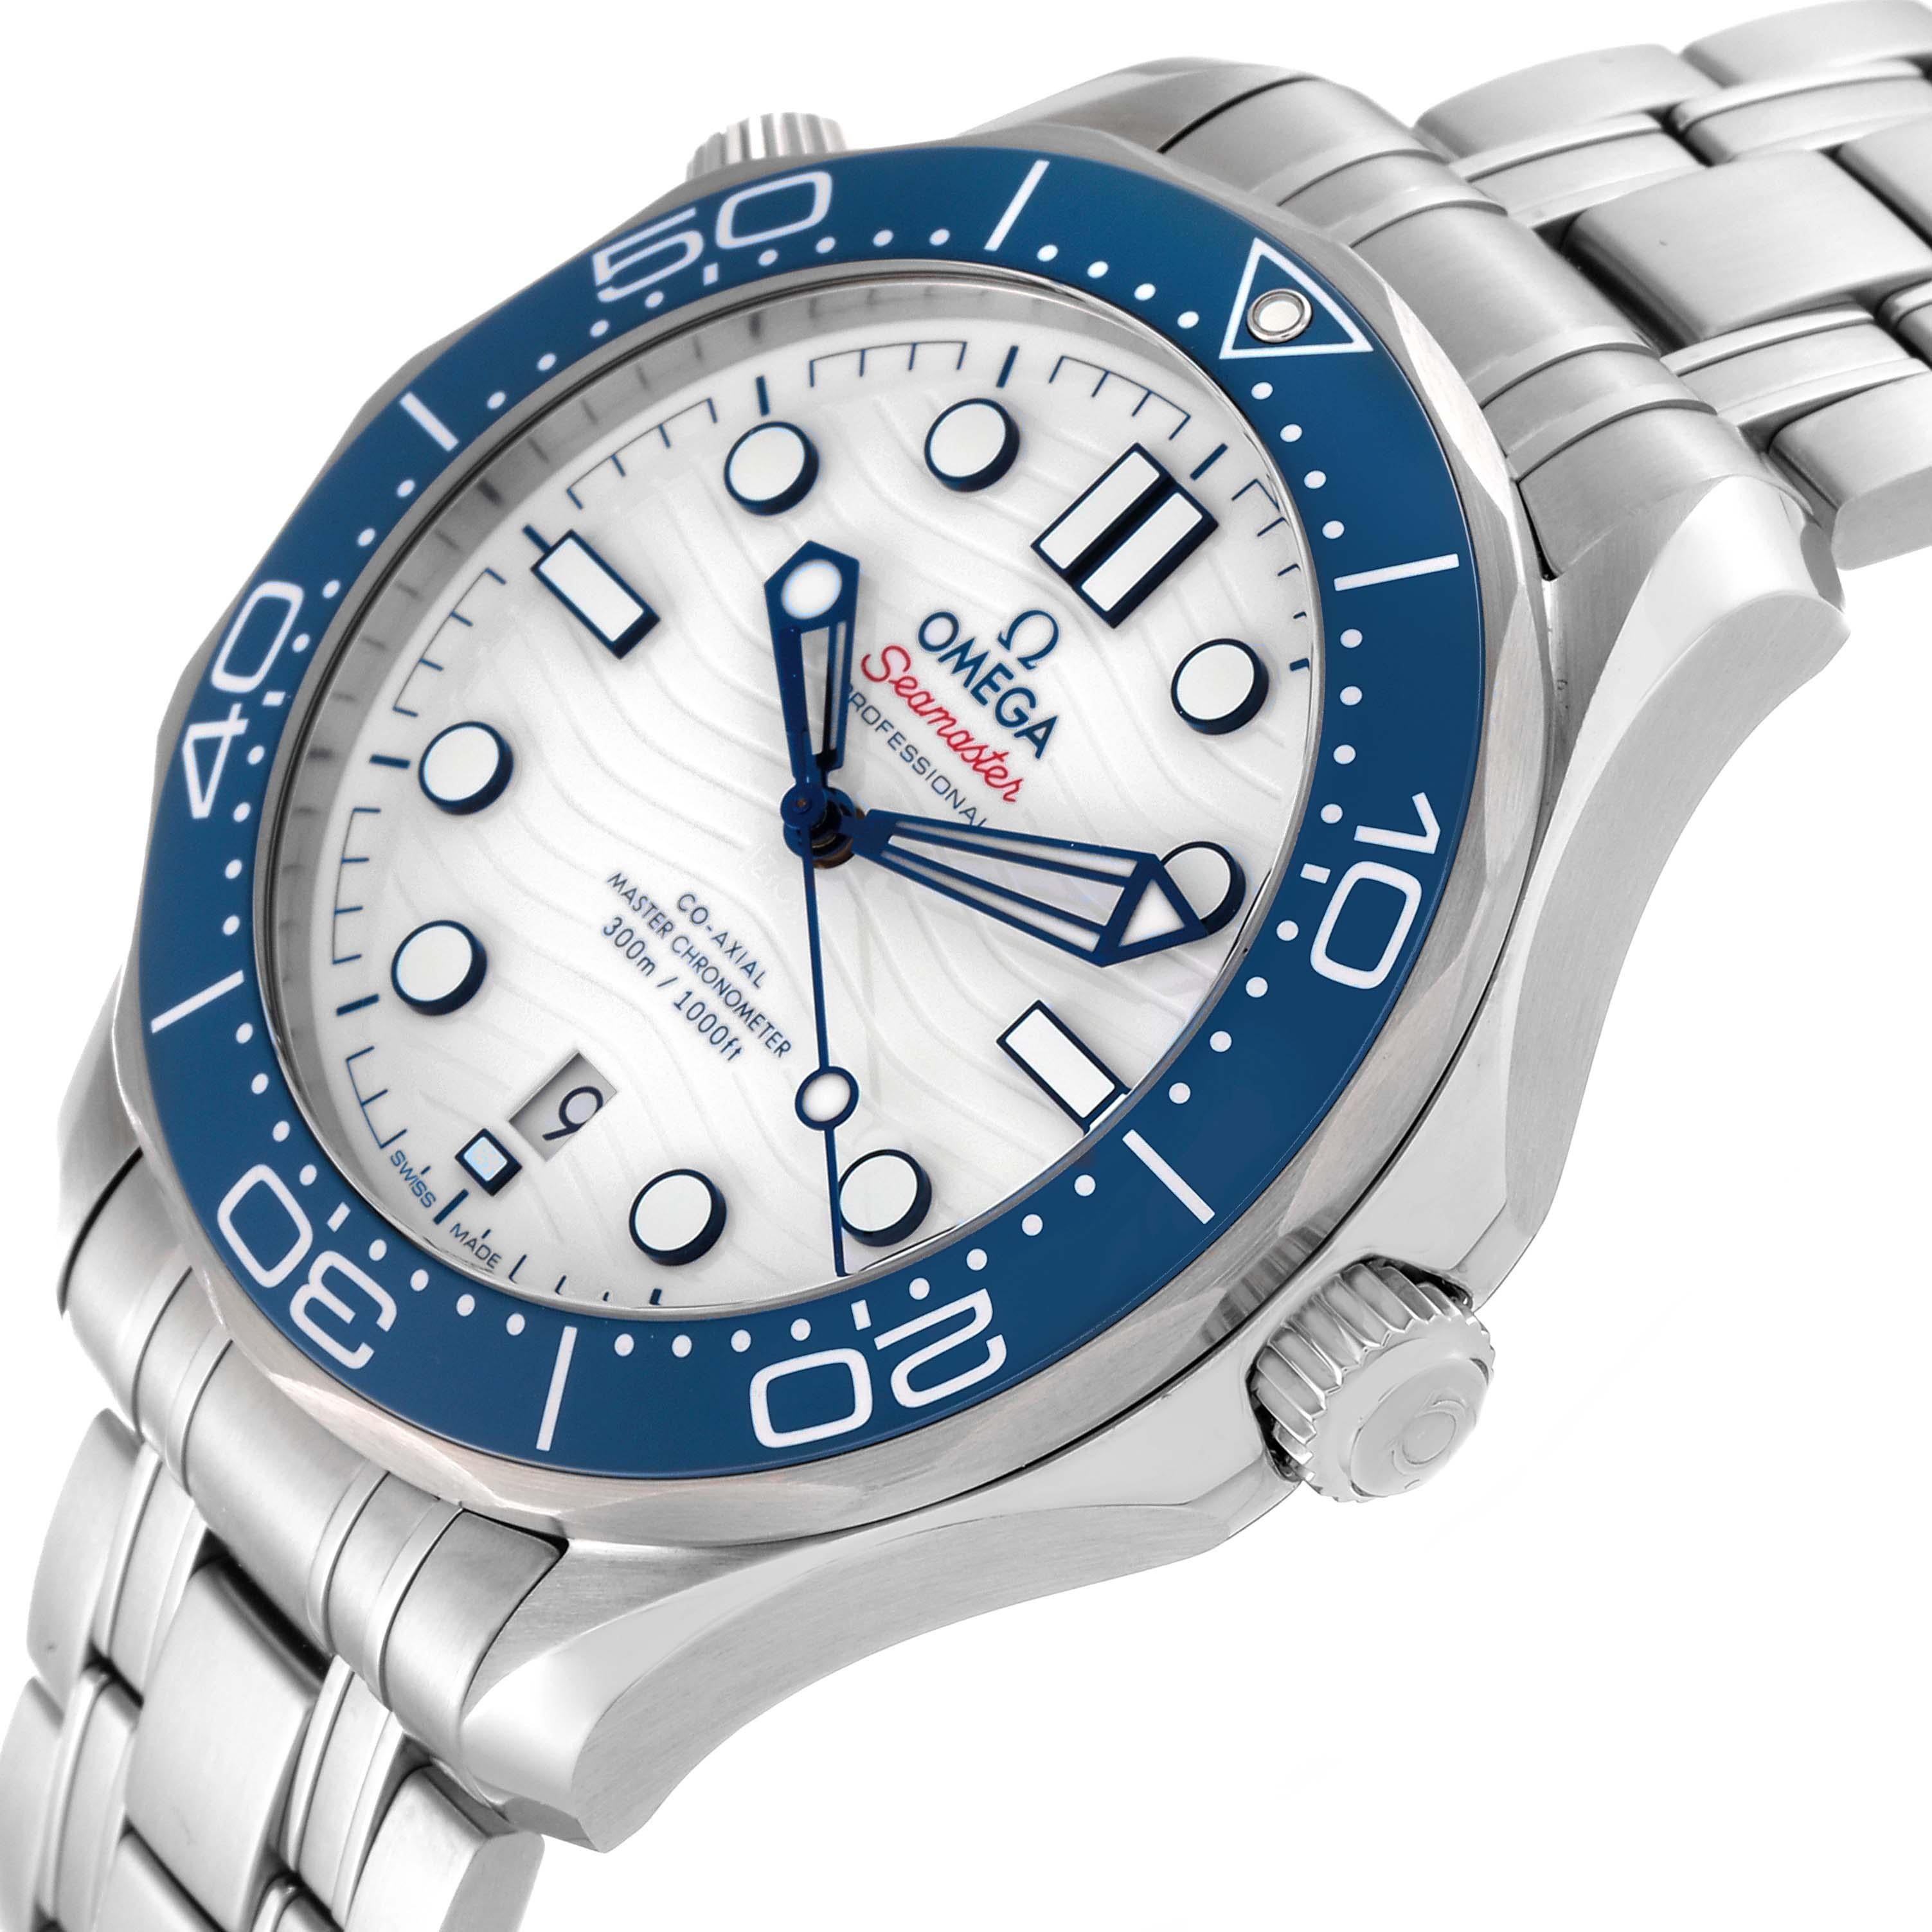 Men's Omega Seamaster Tokyo 2020 LE Steel Mens Watch 522.30.42.20.04.001 Box Card For Sale